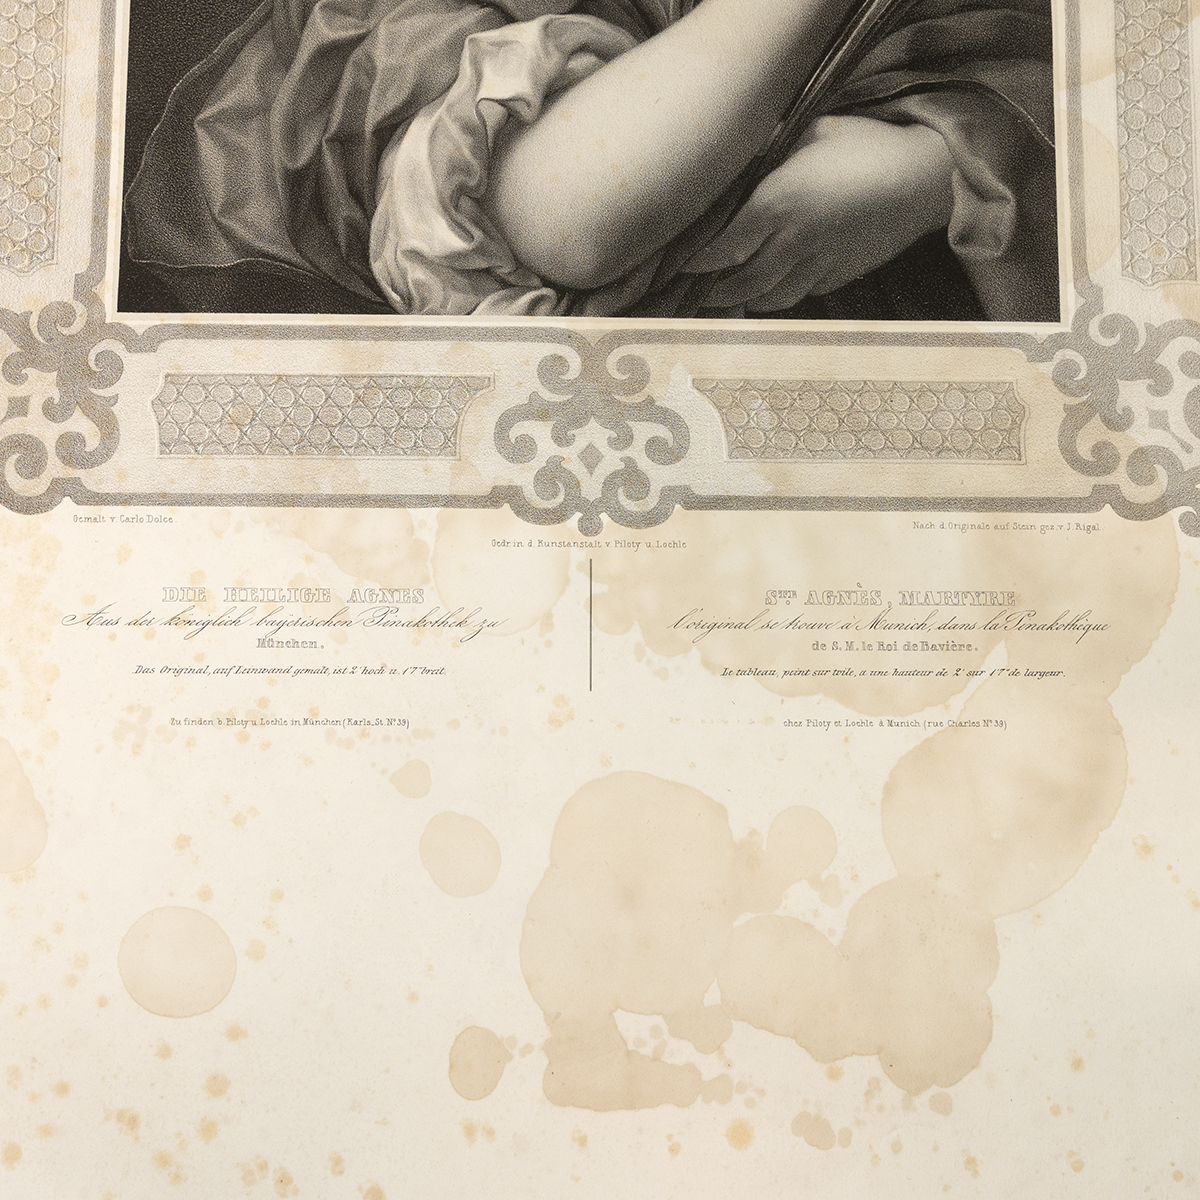 After Carlo Dolci (1616-1686) by V. Leng (fl. early 19th century) - St. Agnes Martyr, lithograph ... - Image 3 of 3